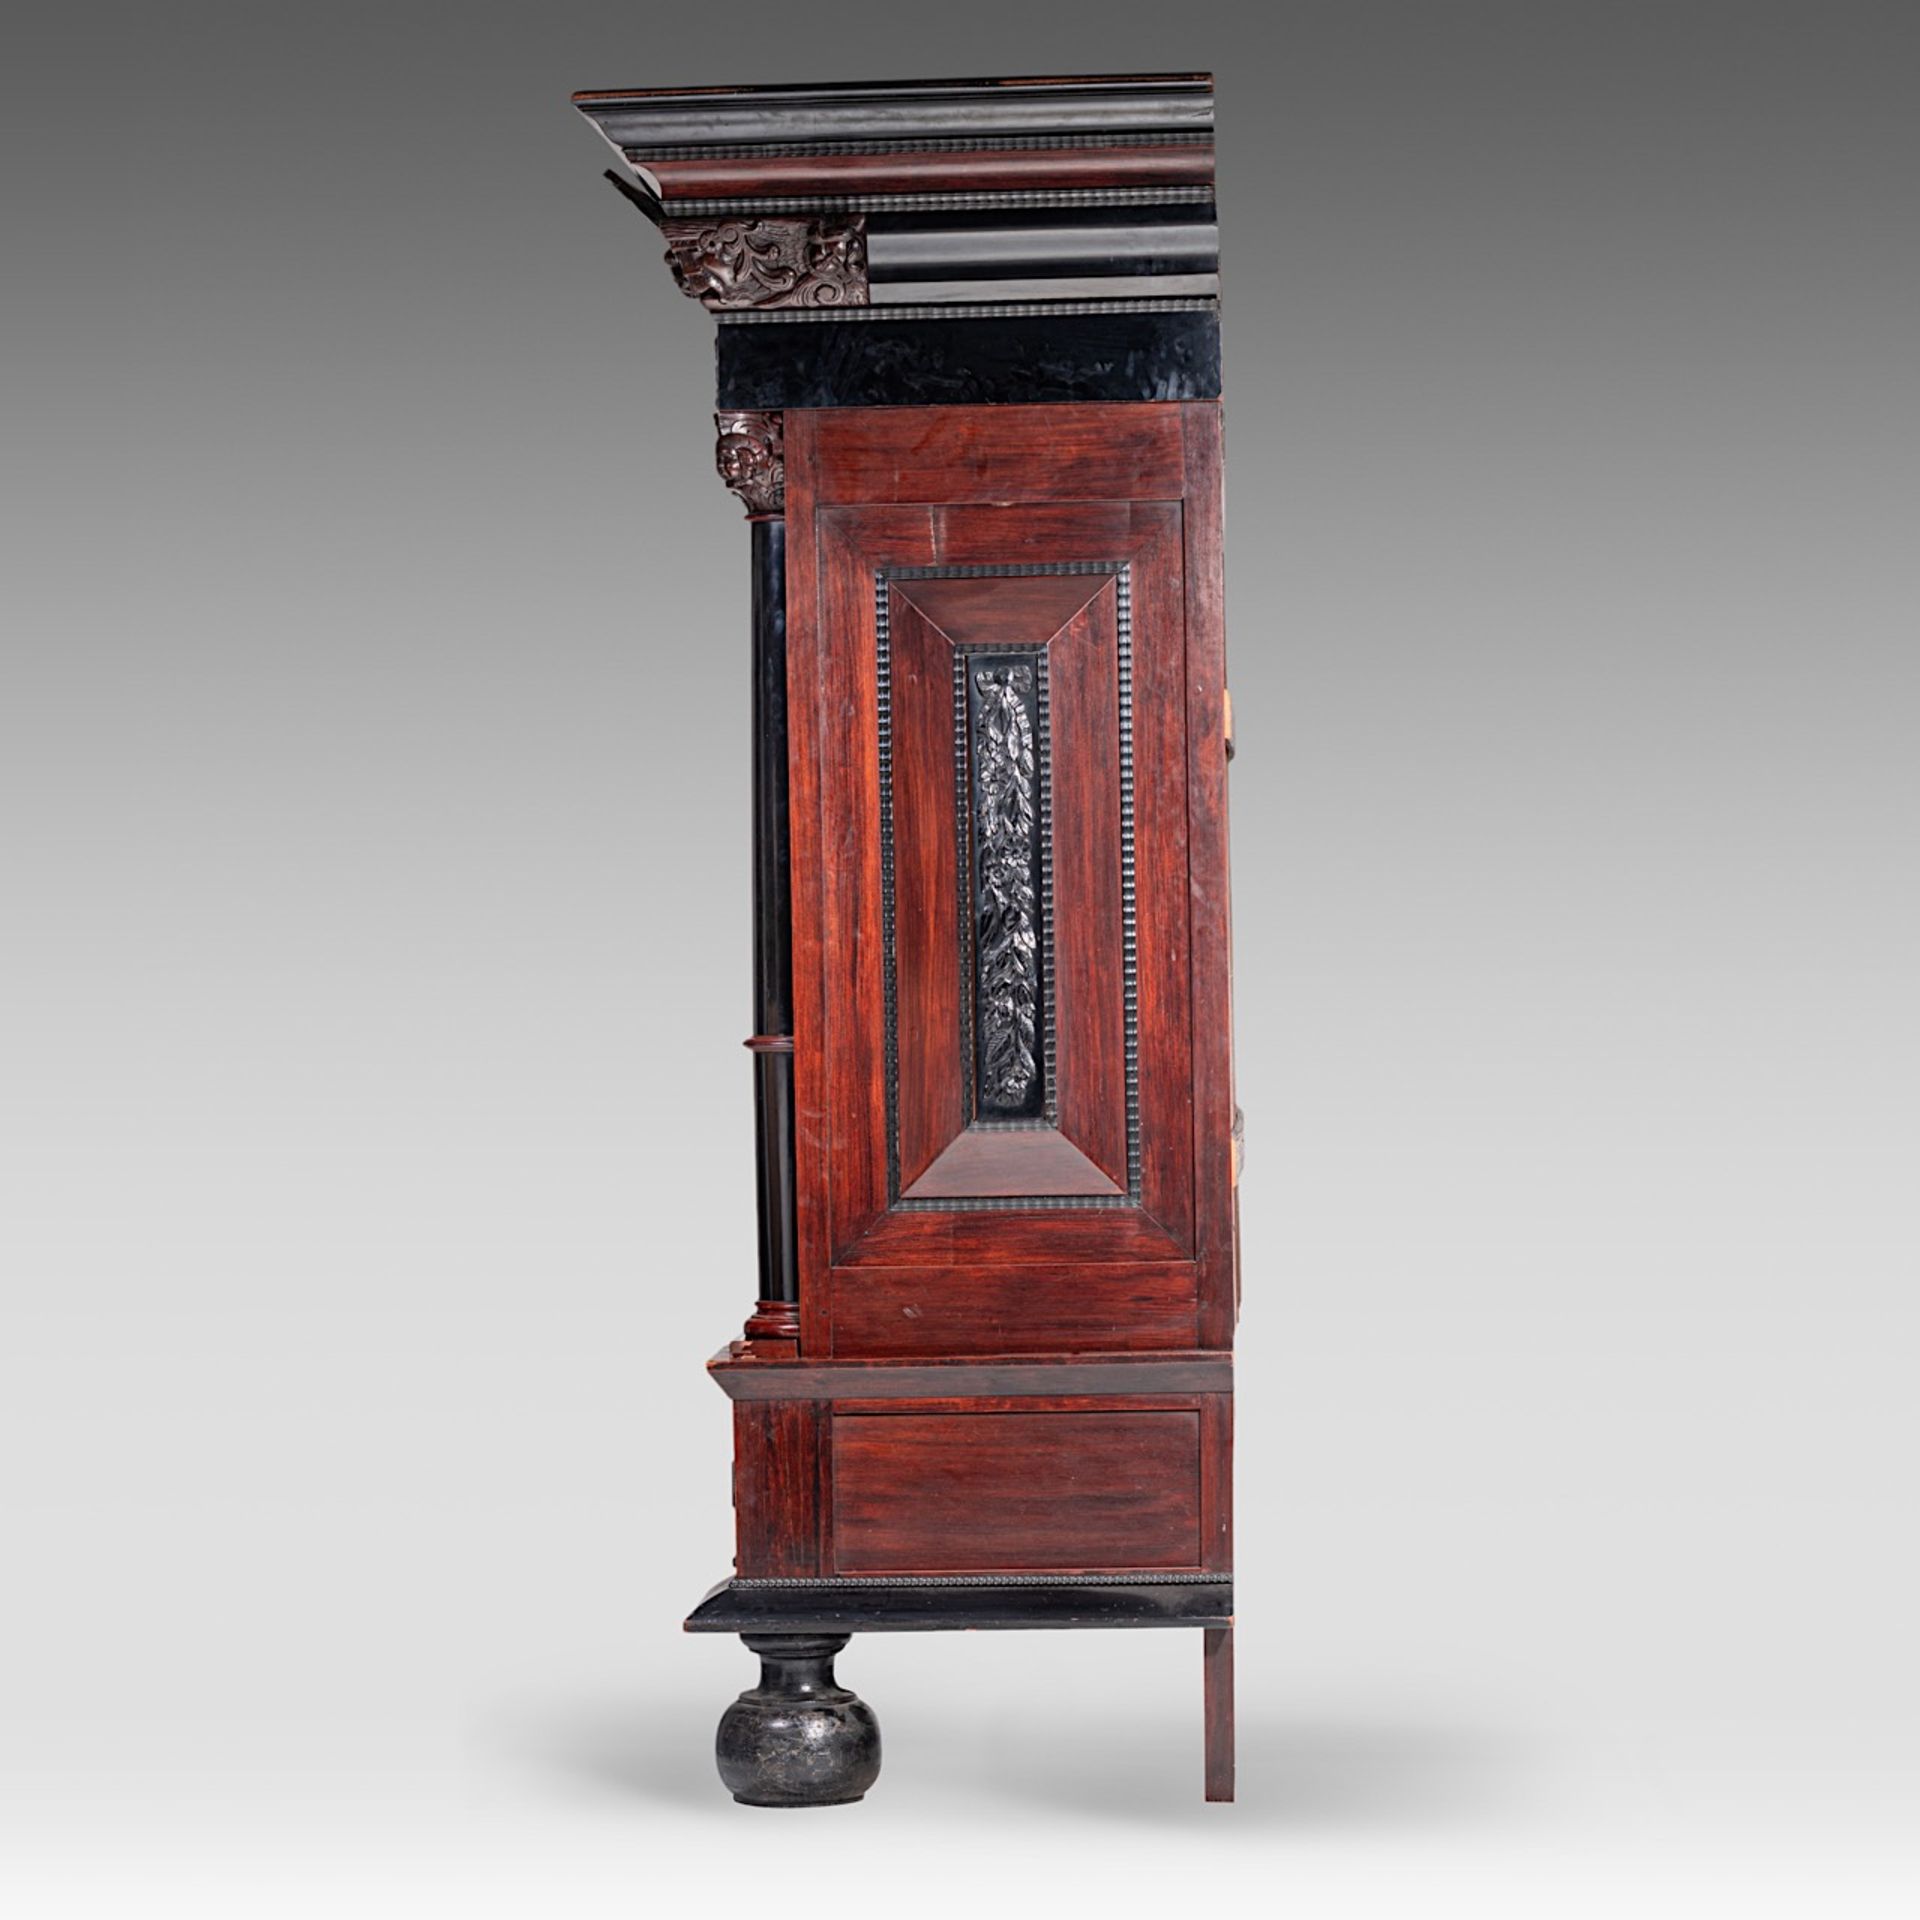 A large Baroque style rosewood and ebony cupboard, H 235 - W 200 - D 85 cm - Bild 3 aus 6